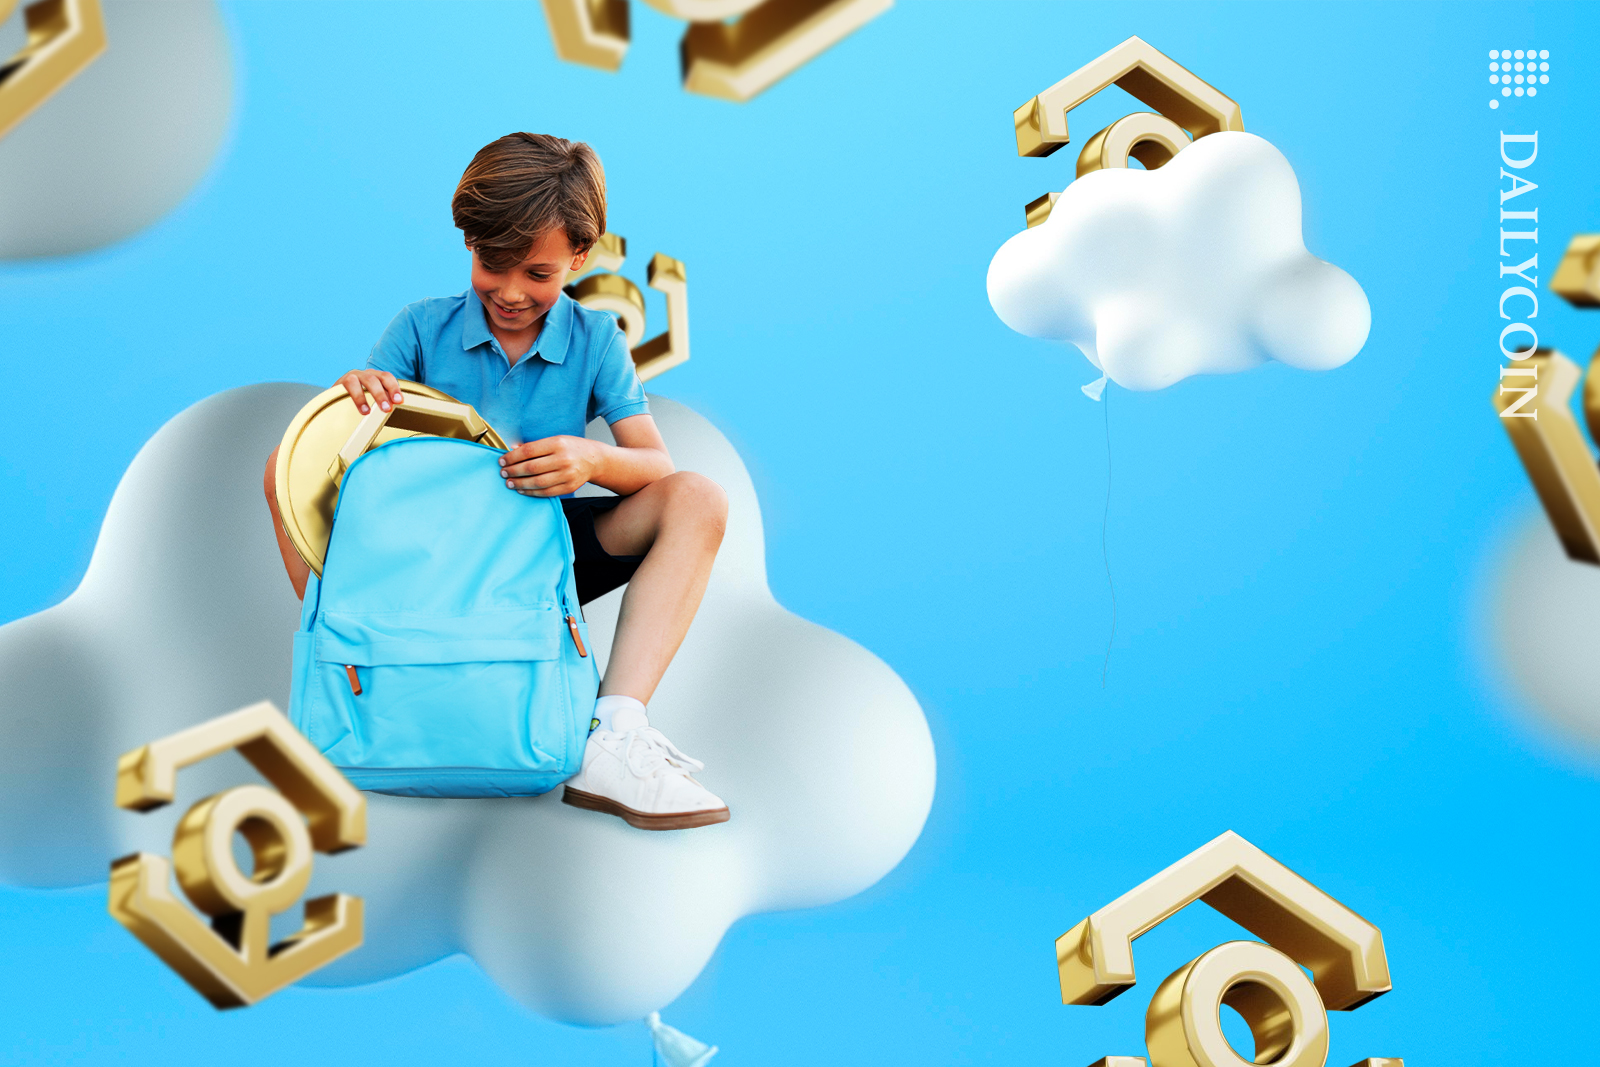 Little boy unpacking his backpack on a cloud finding a ANKR coin inside.